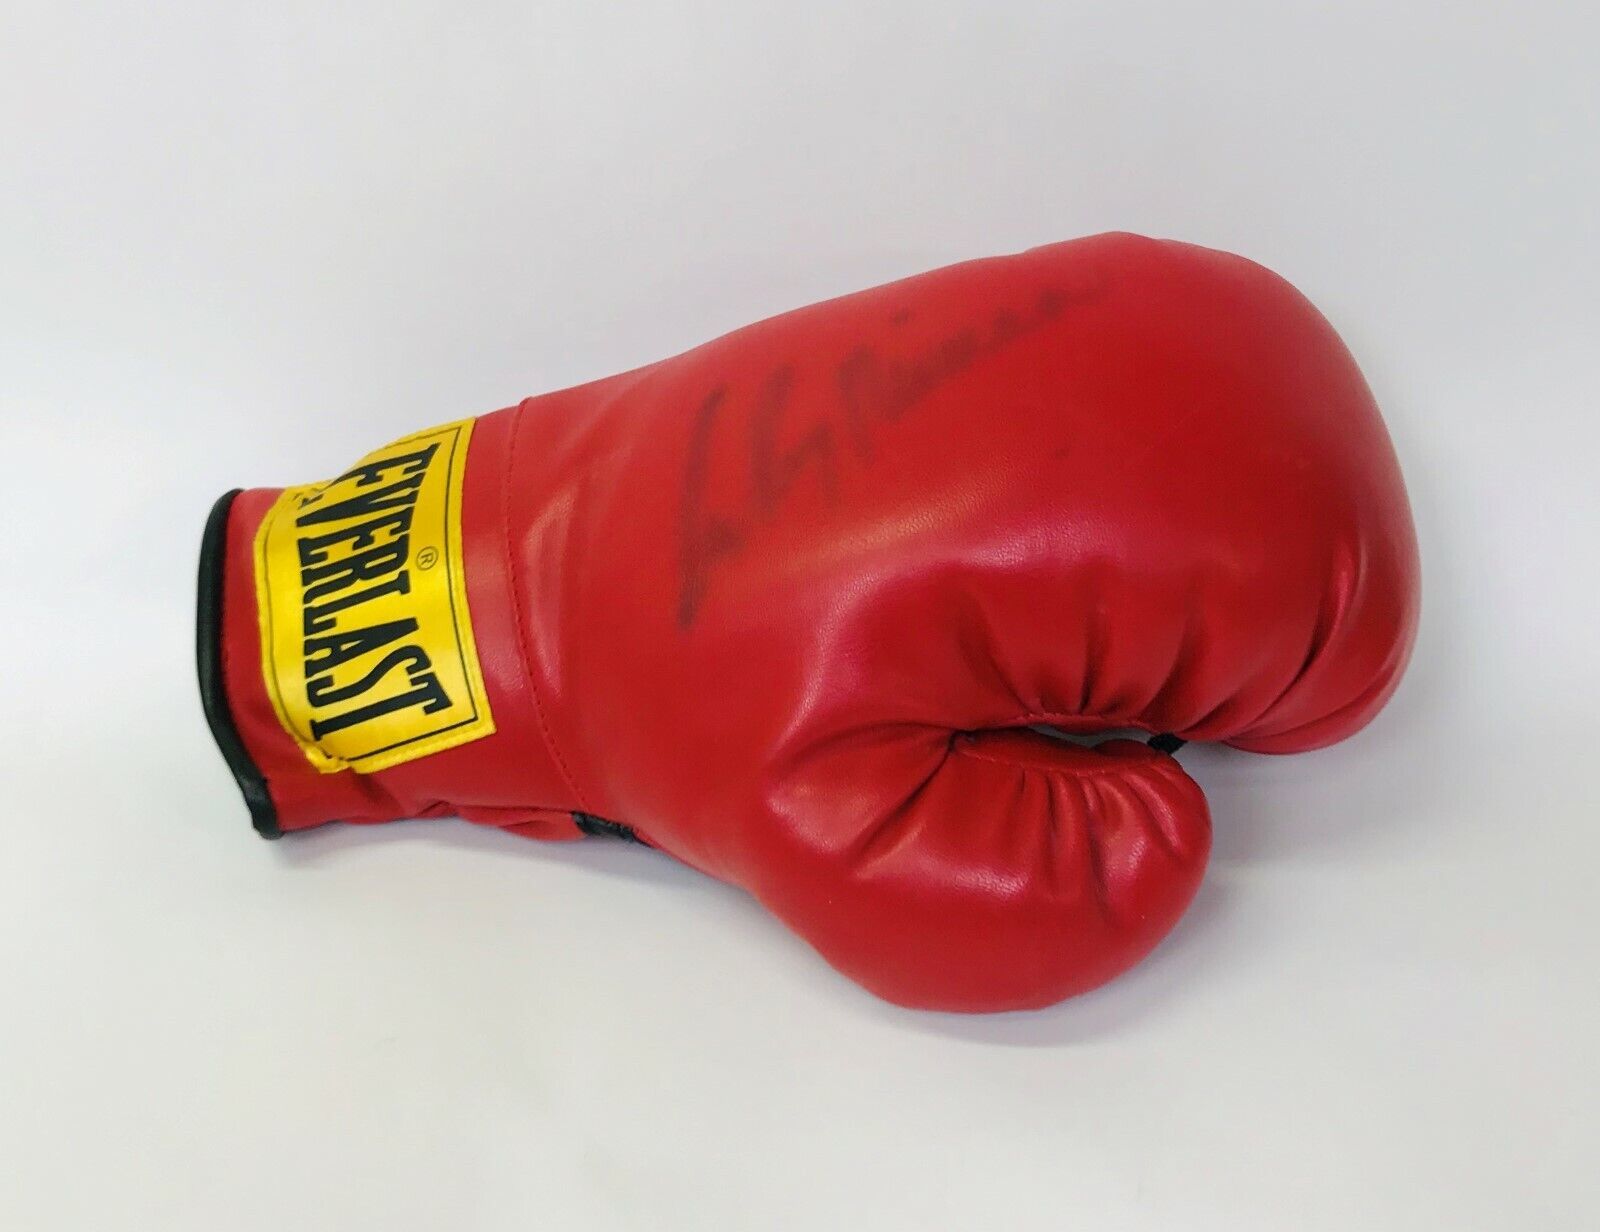 Primary image for LEROY NEIMAN AUTOGRAPHED EVERLAST BOXING GLOVE COA INCLUDED